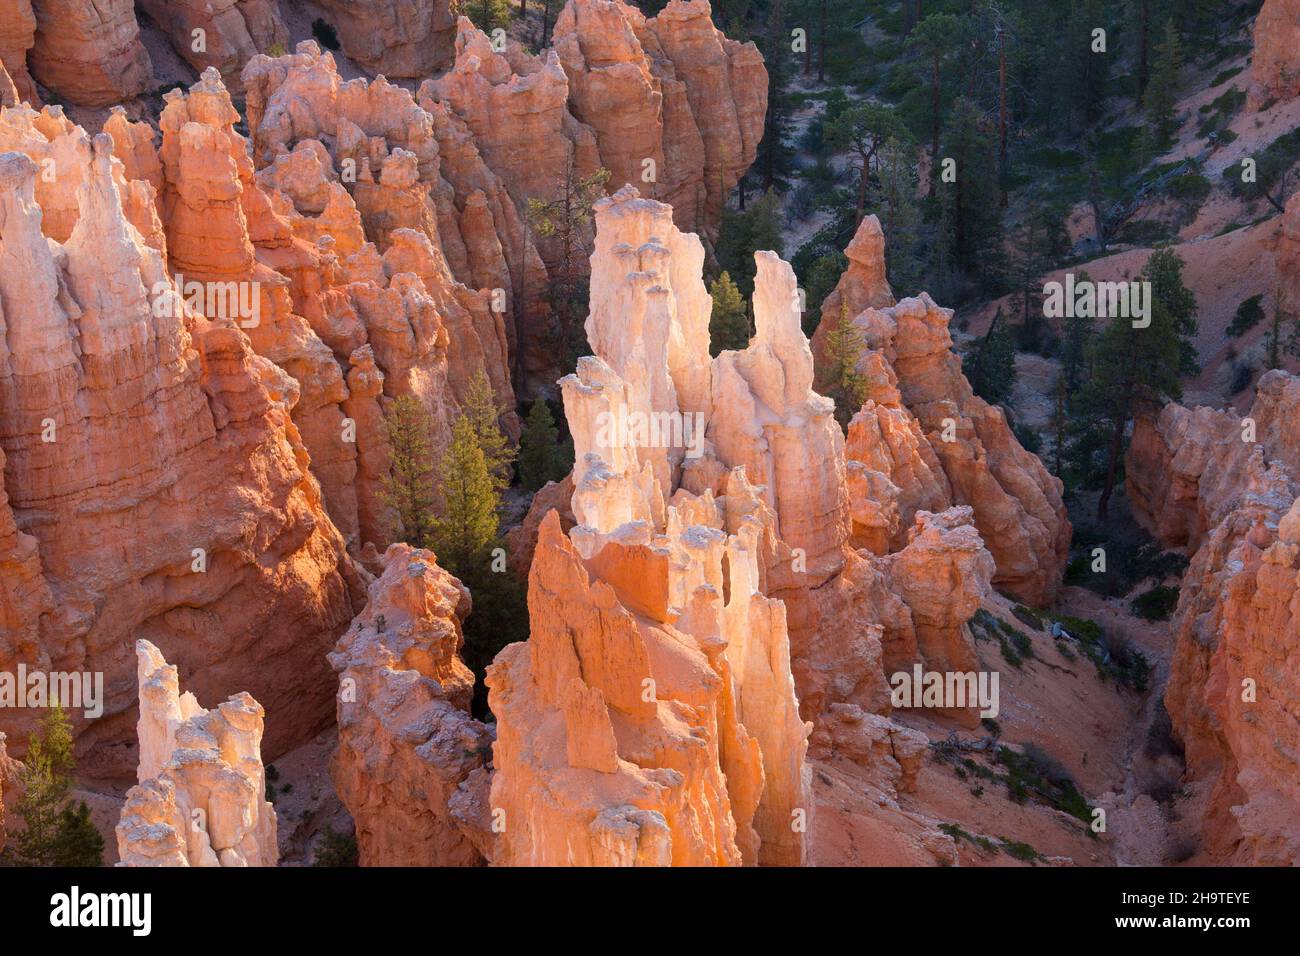 Bryce Canyon National Park, Utah, USA. View over backlit hoodoos in Bryce Amphitheatre from the Rim Trail at Inspiration Point, sunrise. Stock Photo